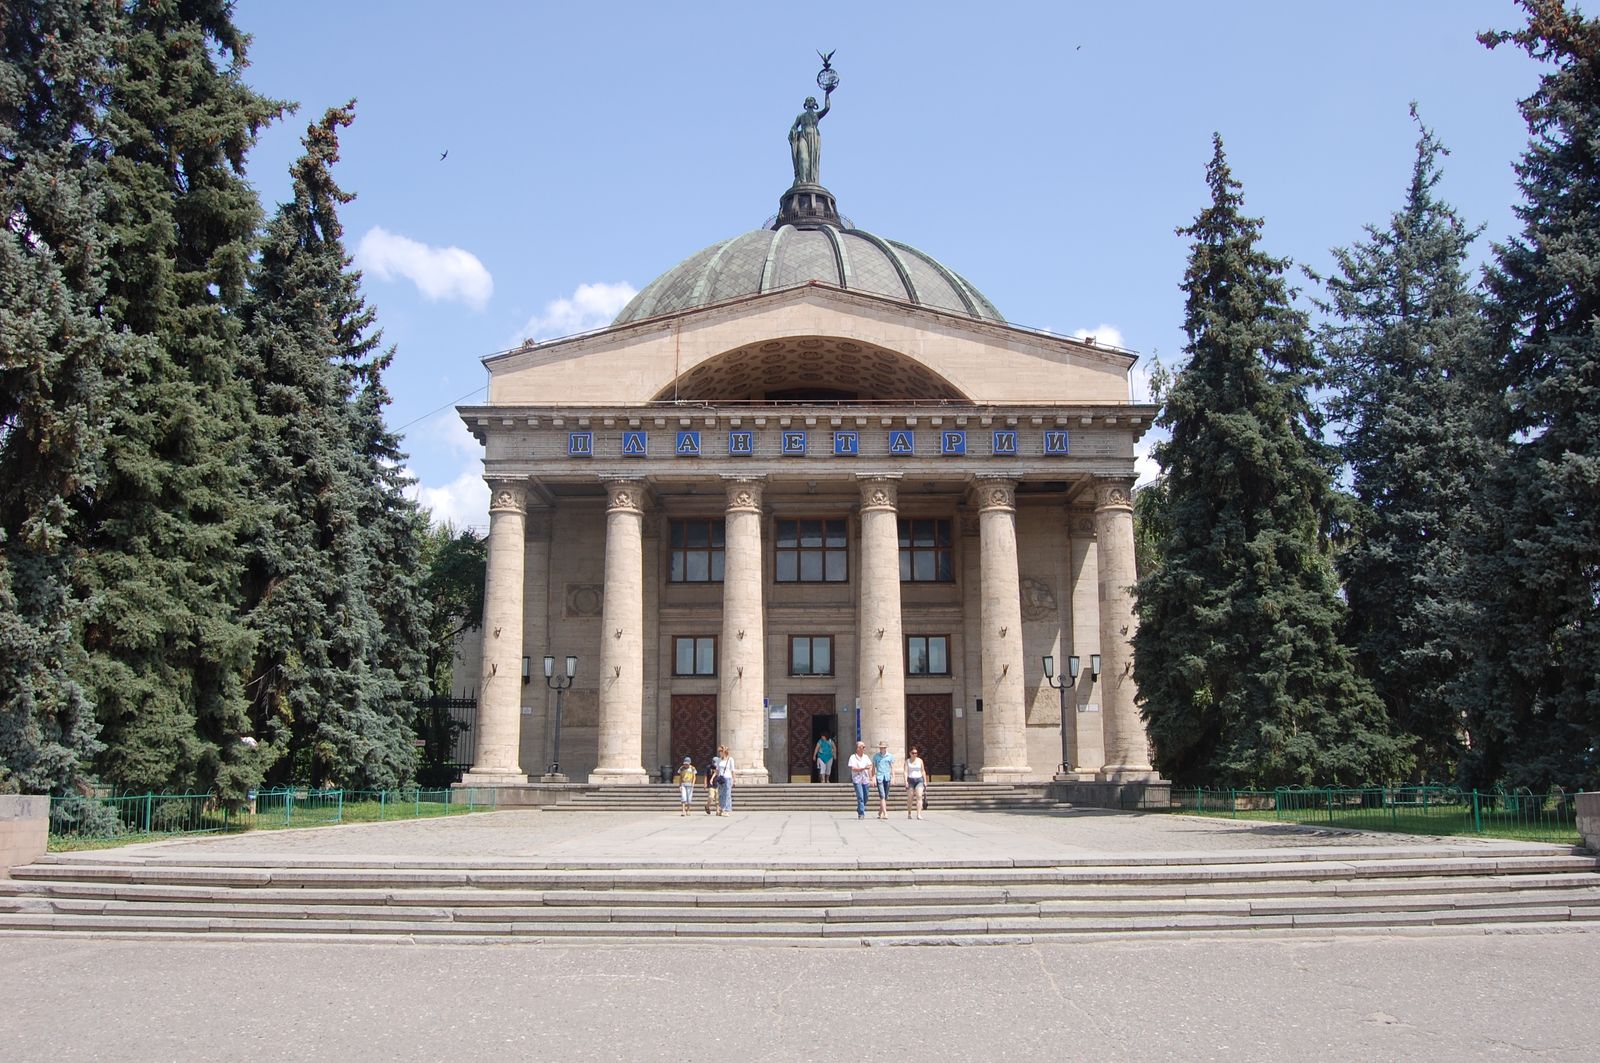 Planetarium_of_Volgograd_city_is_the_only_planetarium_in_the_lower_Volga_region_Opened_in_1954_Was_a_gift_of_the_workers_of_the_German_Democratic_Republic_to_the_Soviet_people.JPG